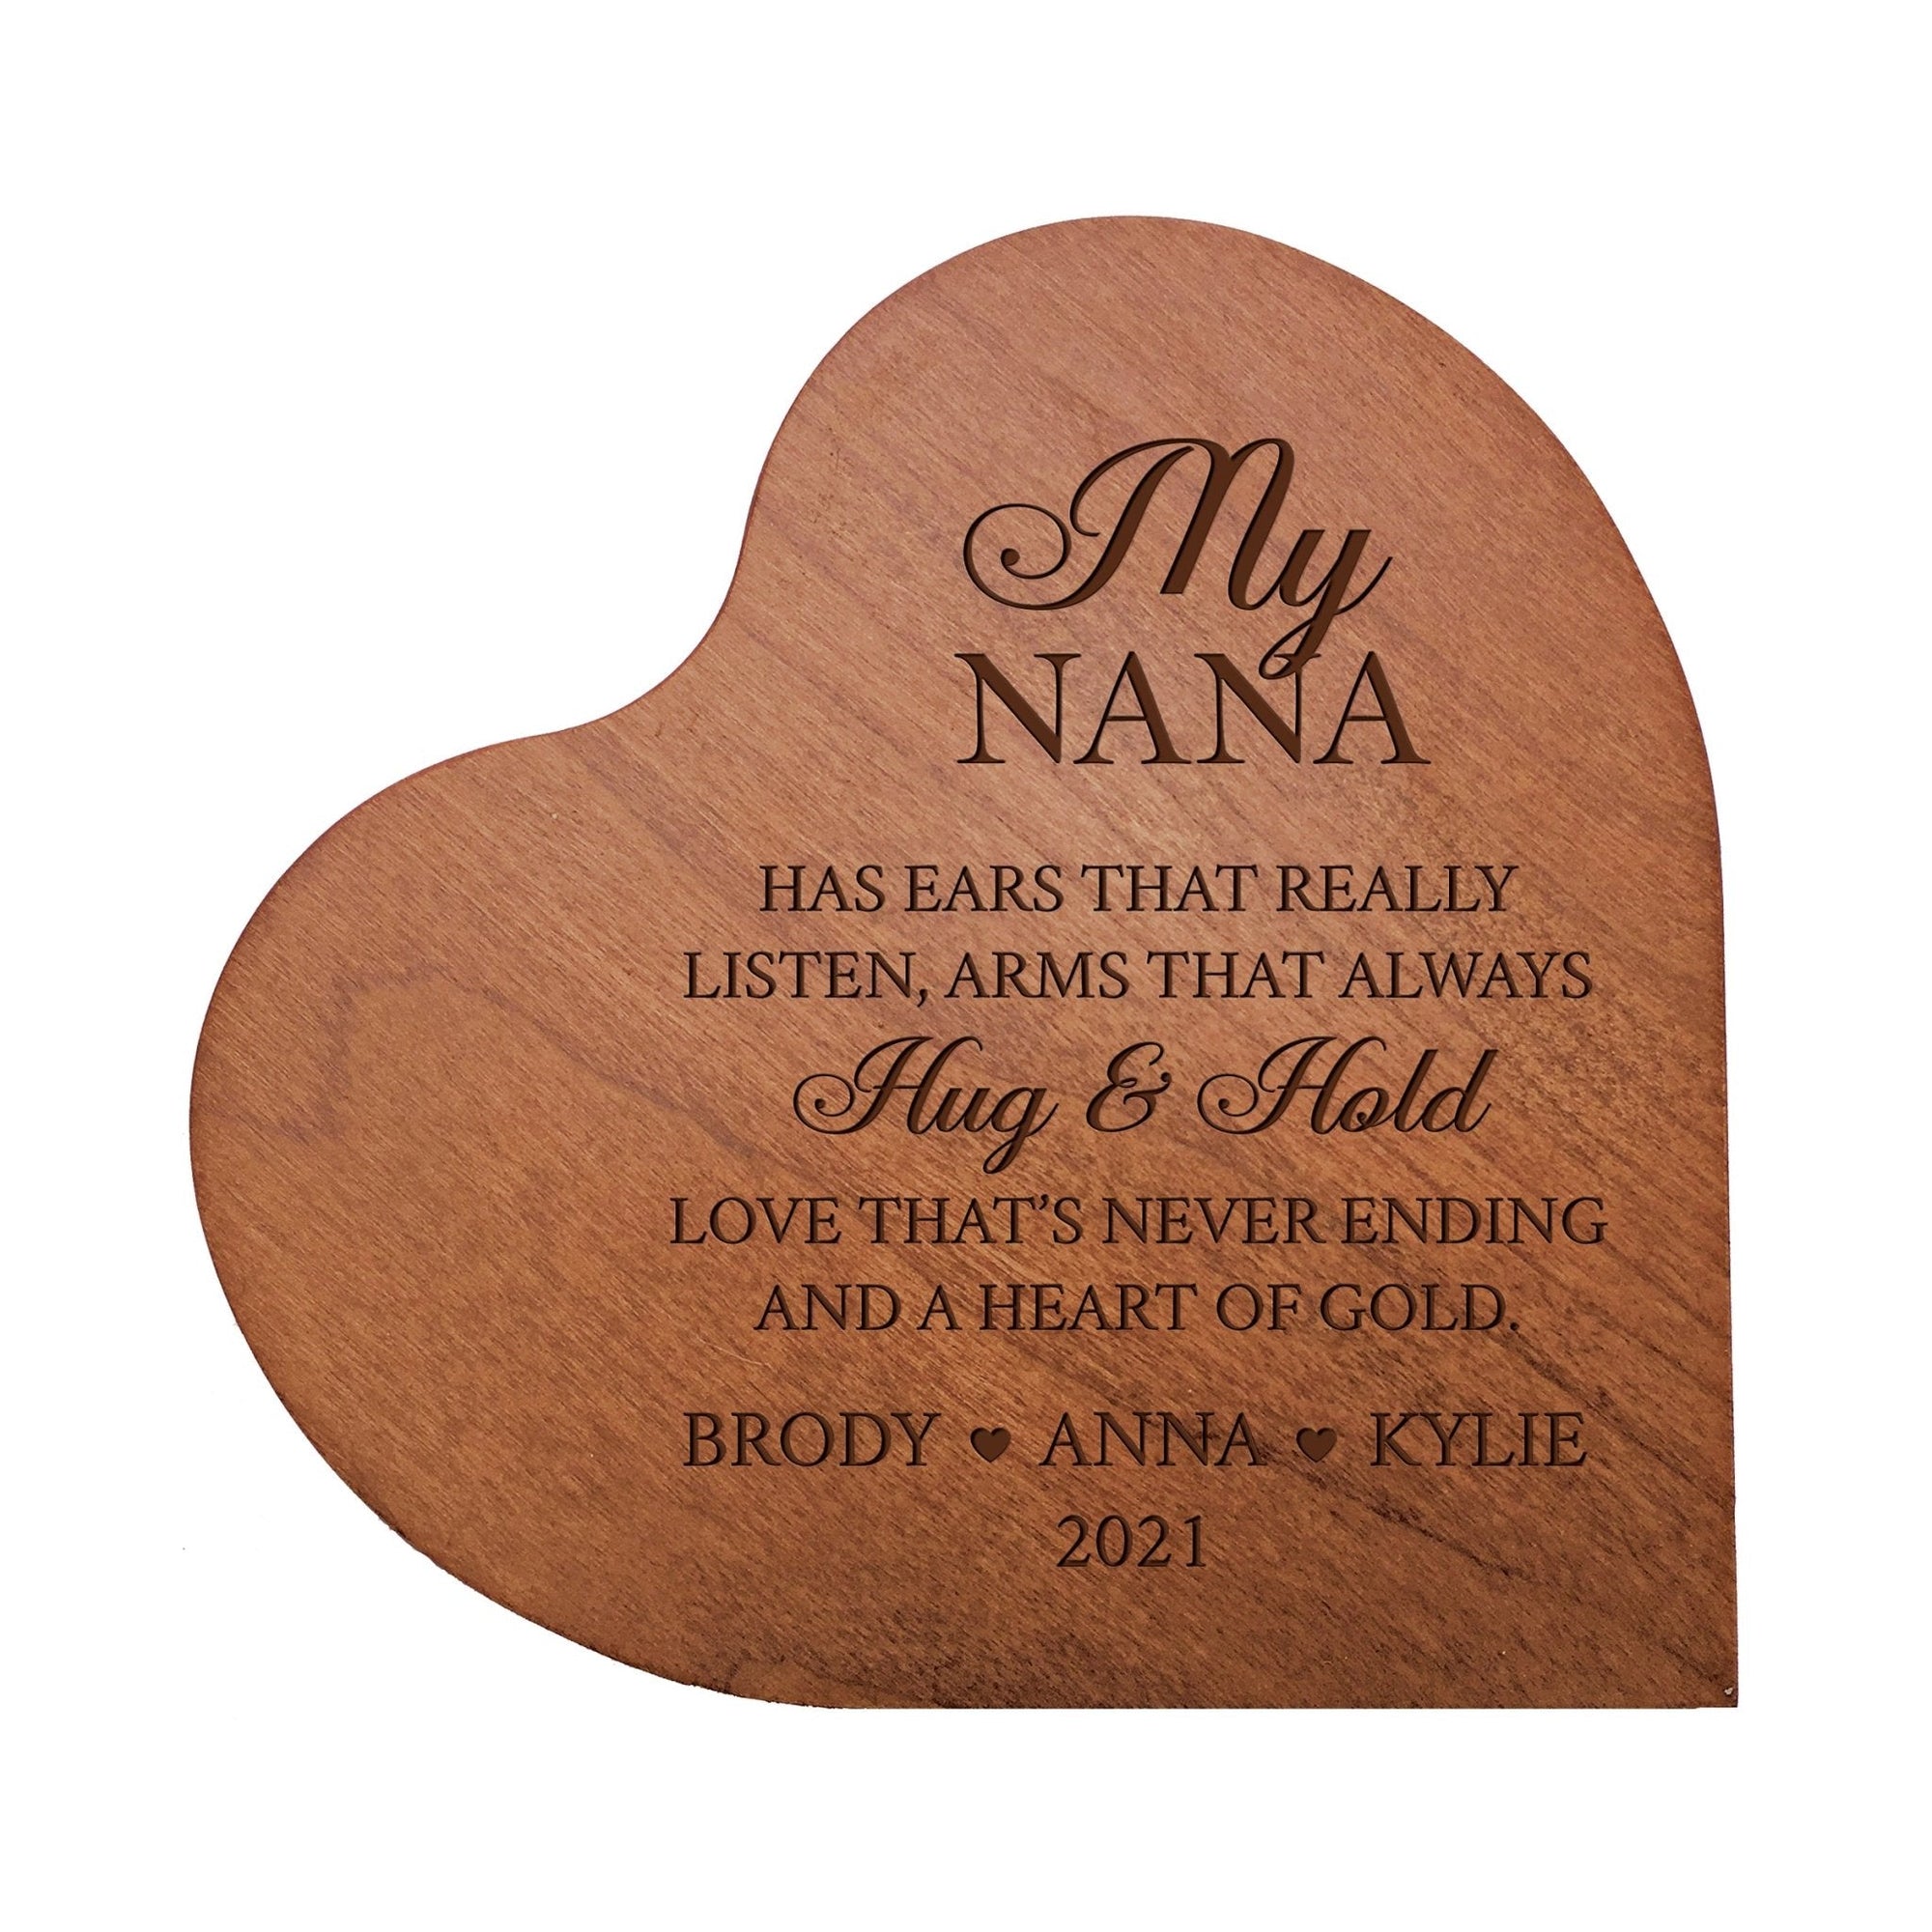 Personalized Modern Nana’s Love Solid Wood Heart Decoration With Inspirational Verse Keepsake Gift 5x5.25 - Nana Has Ears That Really = Hug & Hold - LifeSong Milestones